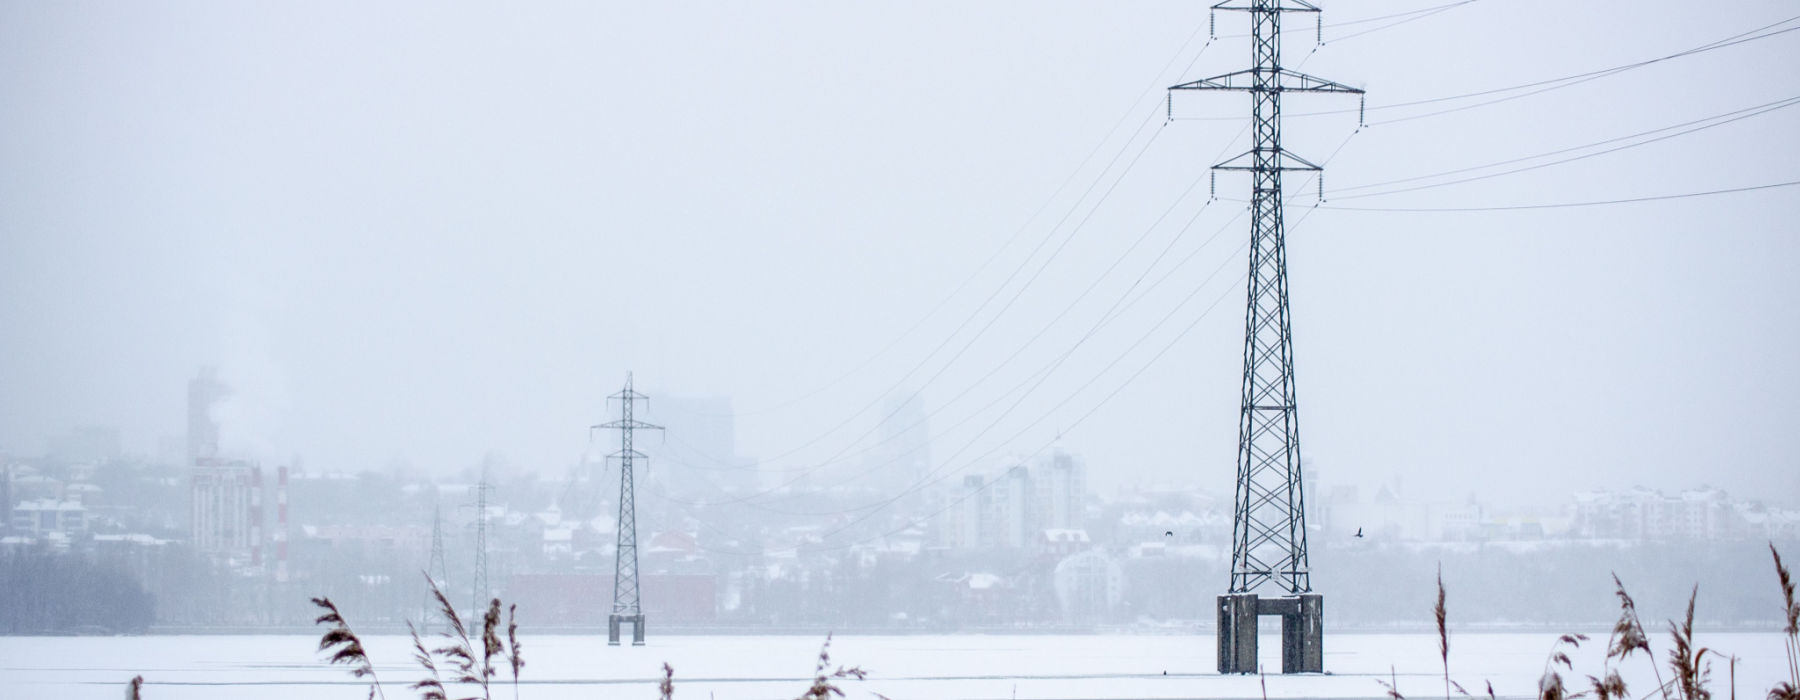 NERC Winter Assessment 2022: Is the New York Grid Ready for Cold Weather?